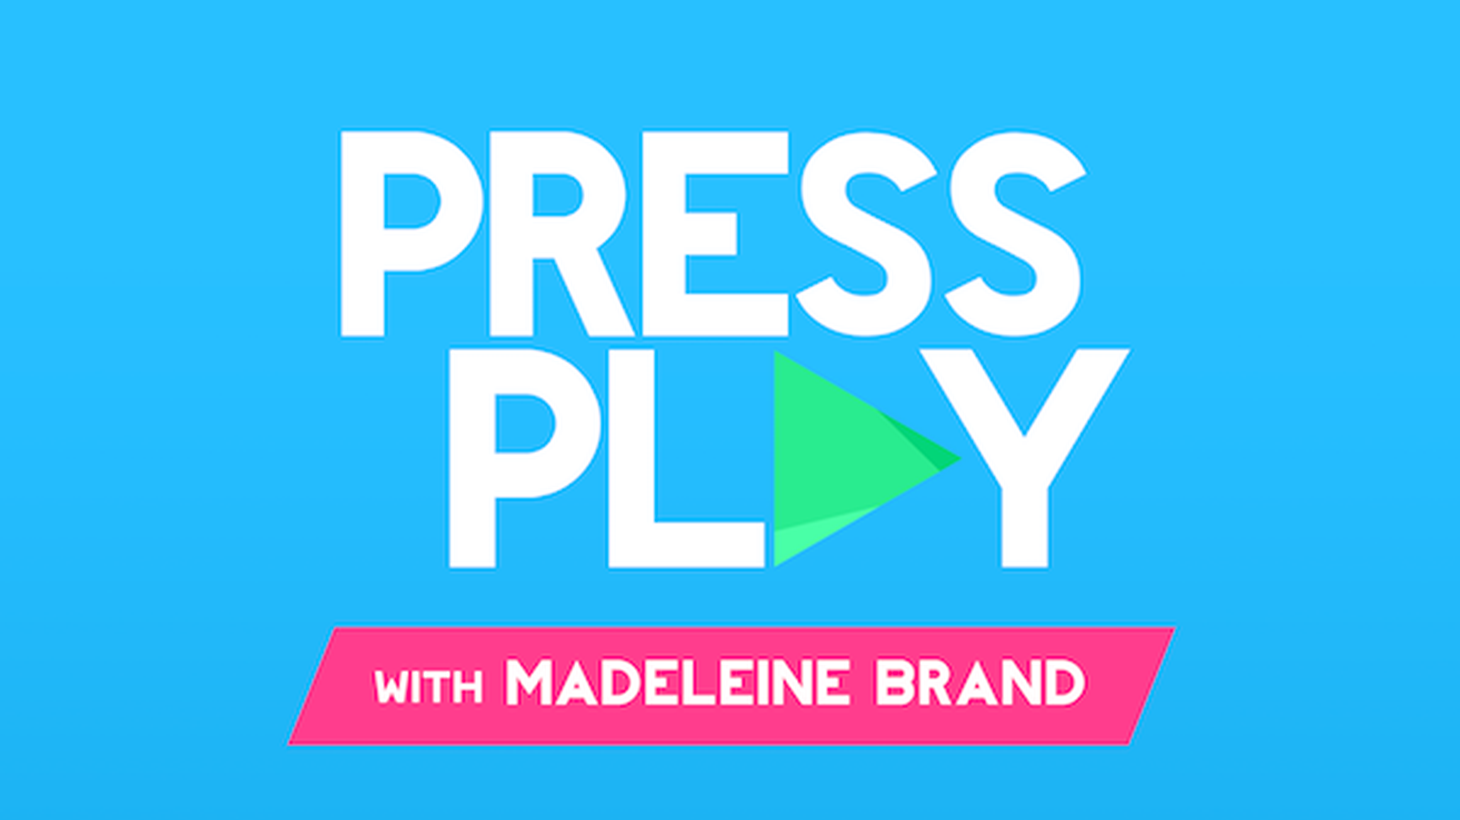 On our inaugural broadcast of KCRW's Press Play, Madeleine Brand talks with politicians, musicians, and more about significant "firsts" of their careers.